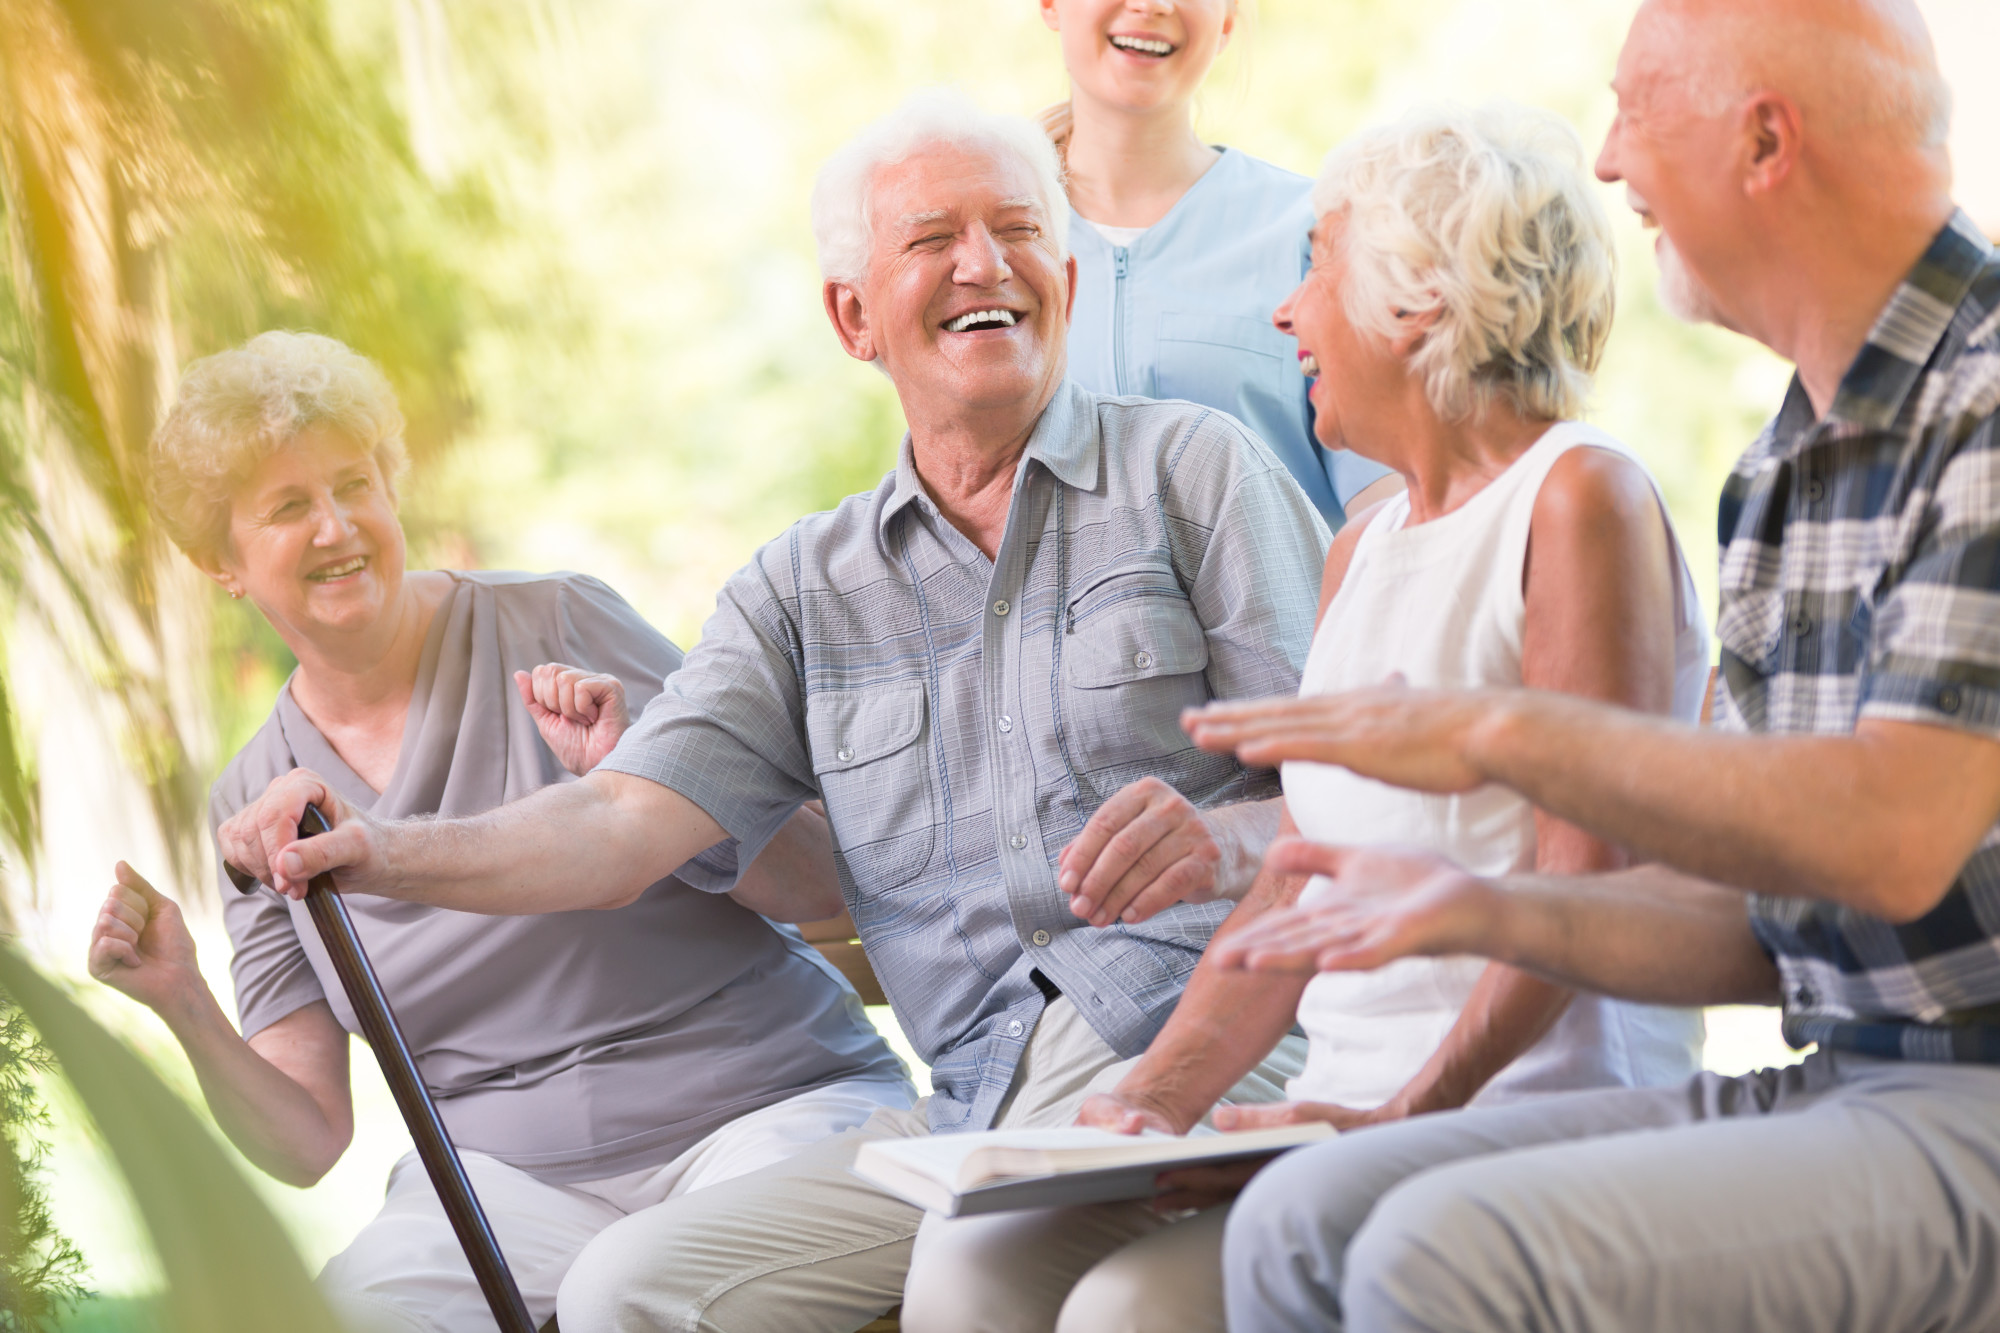 What to Look For When Choosing a Retirement Community